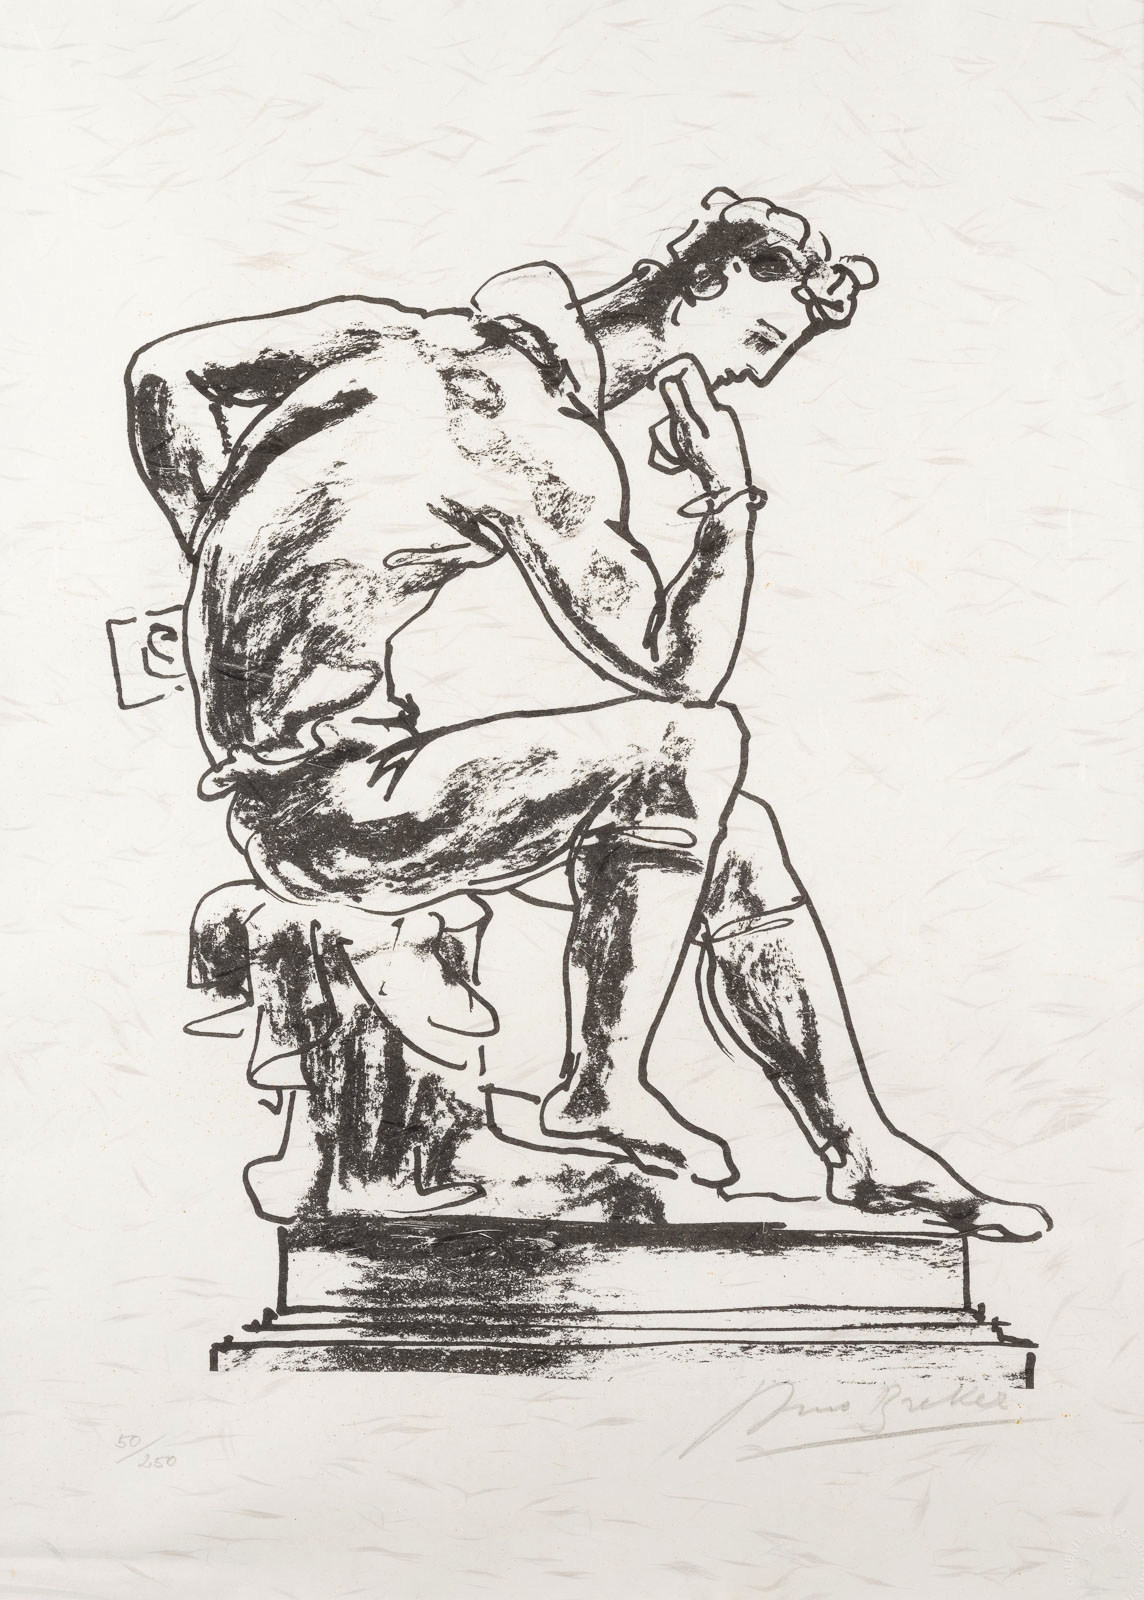 THE THINKER; DIALOGUE OF THE GIRLS by Arno Breker, 1978